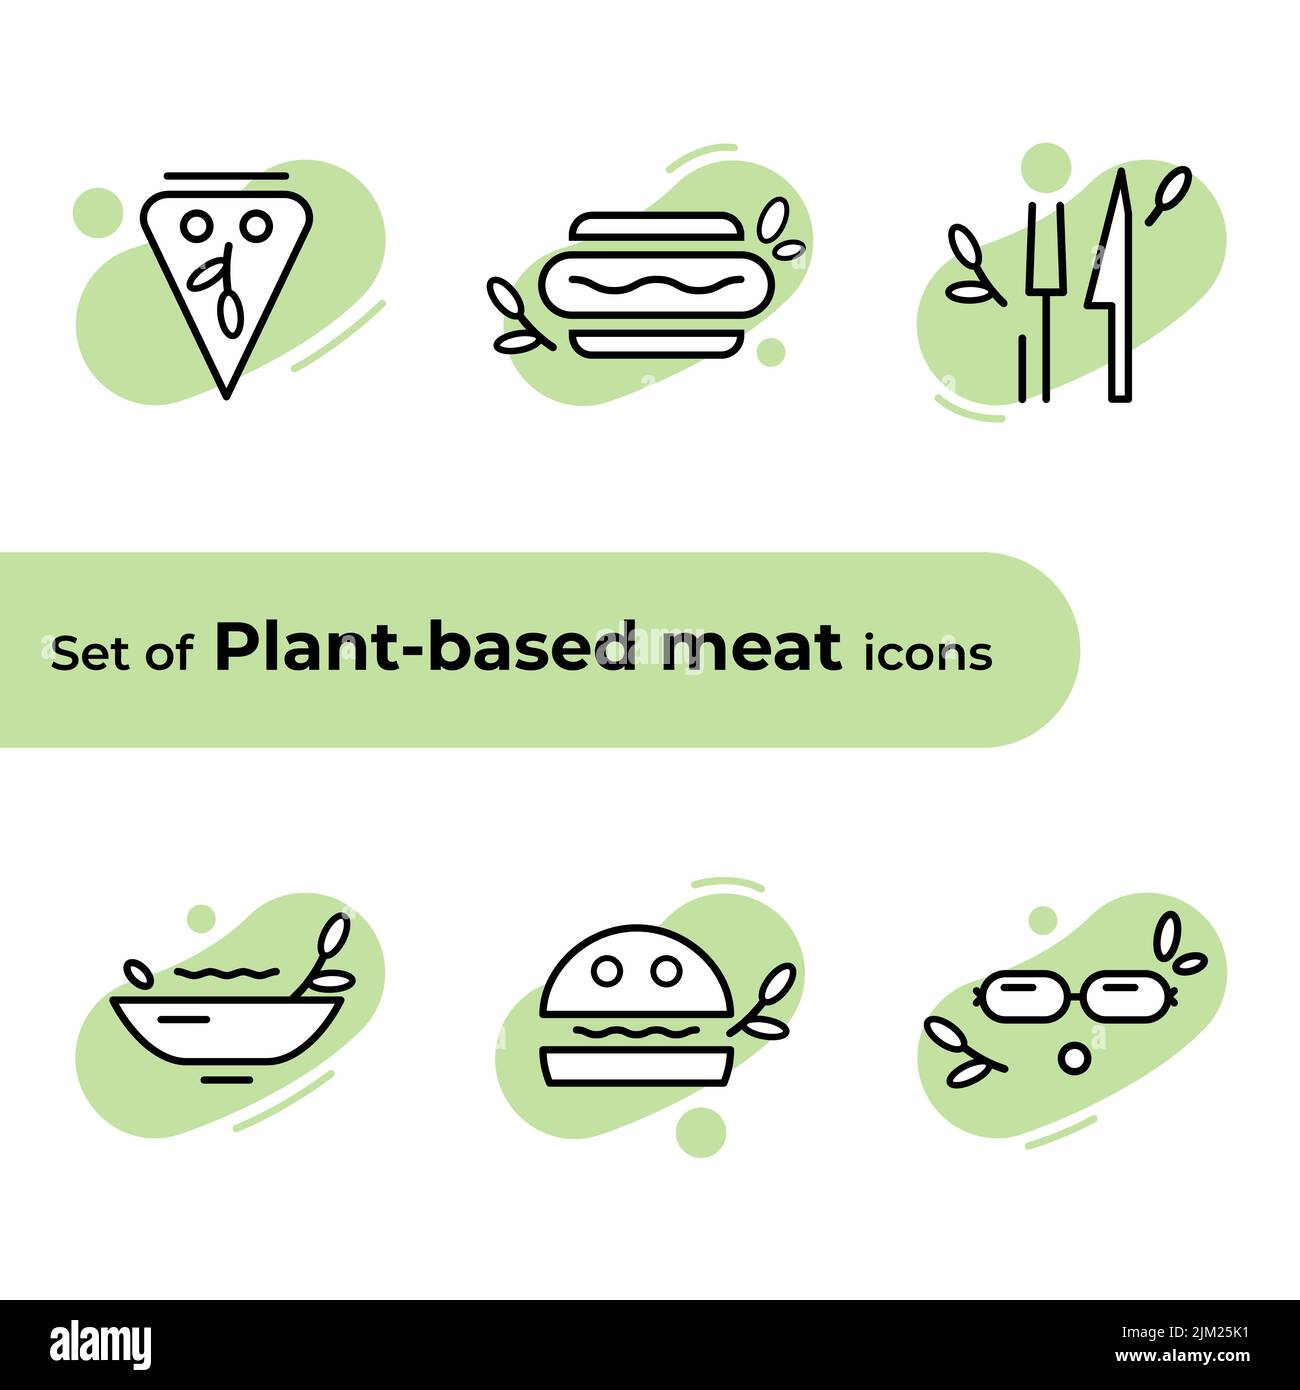 Set of Vector icons. Concept of plant based meat. With concern for the planet and love for animals. Stock Vector